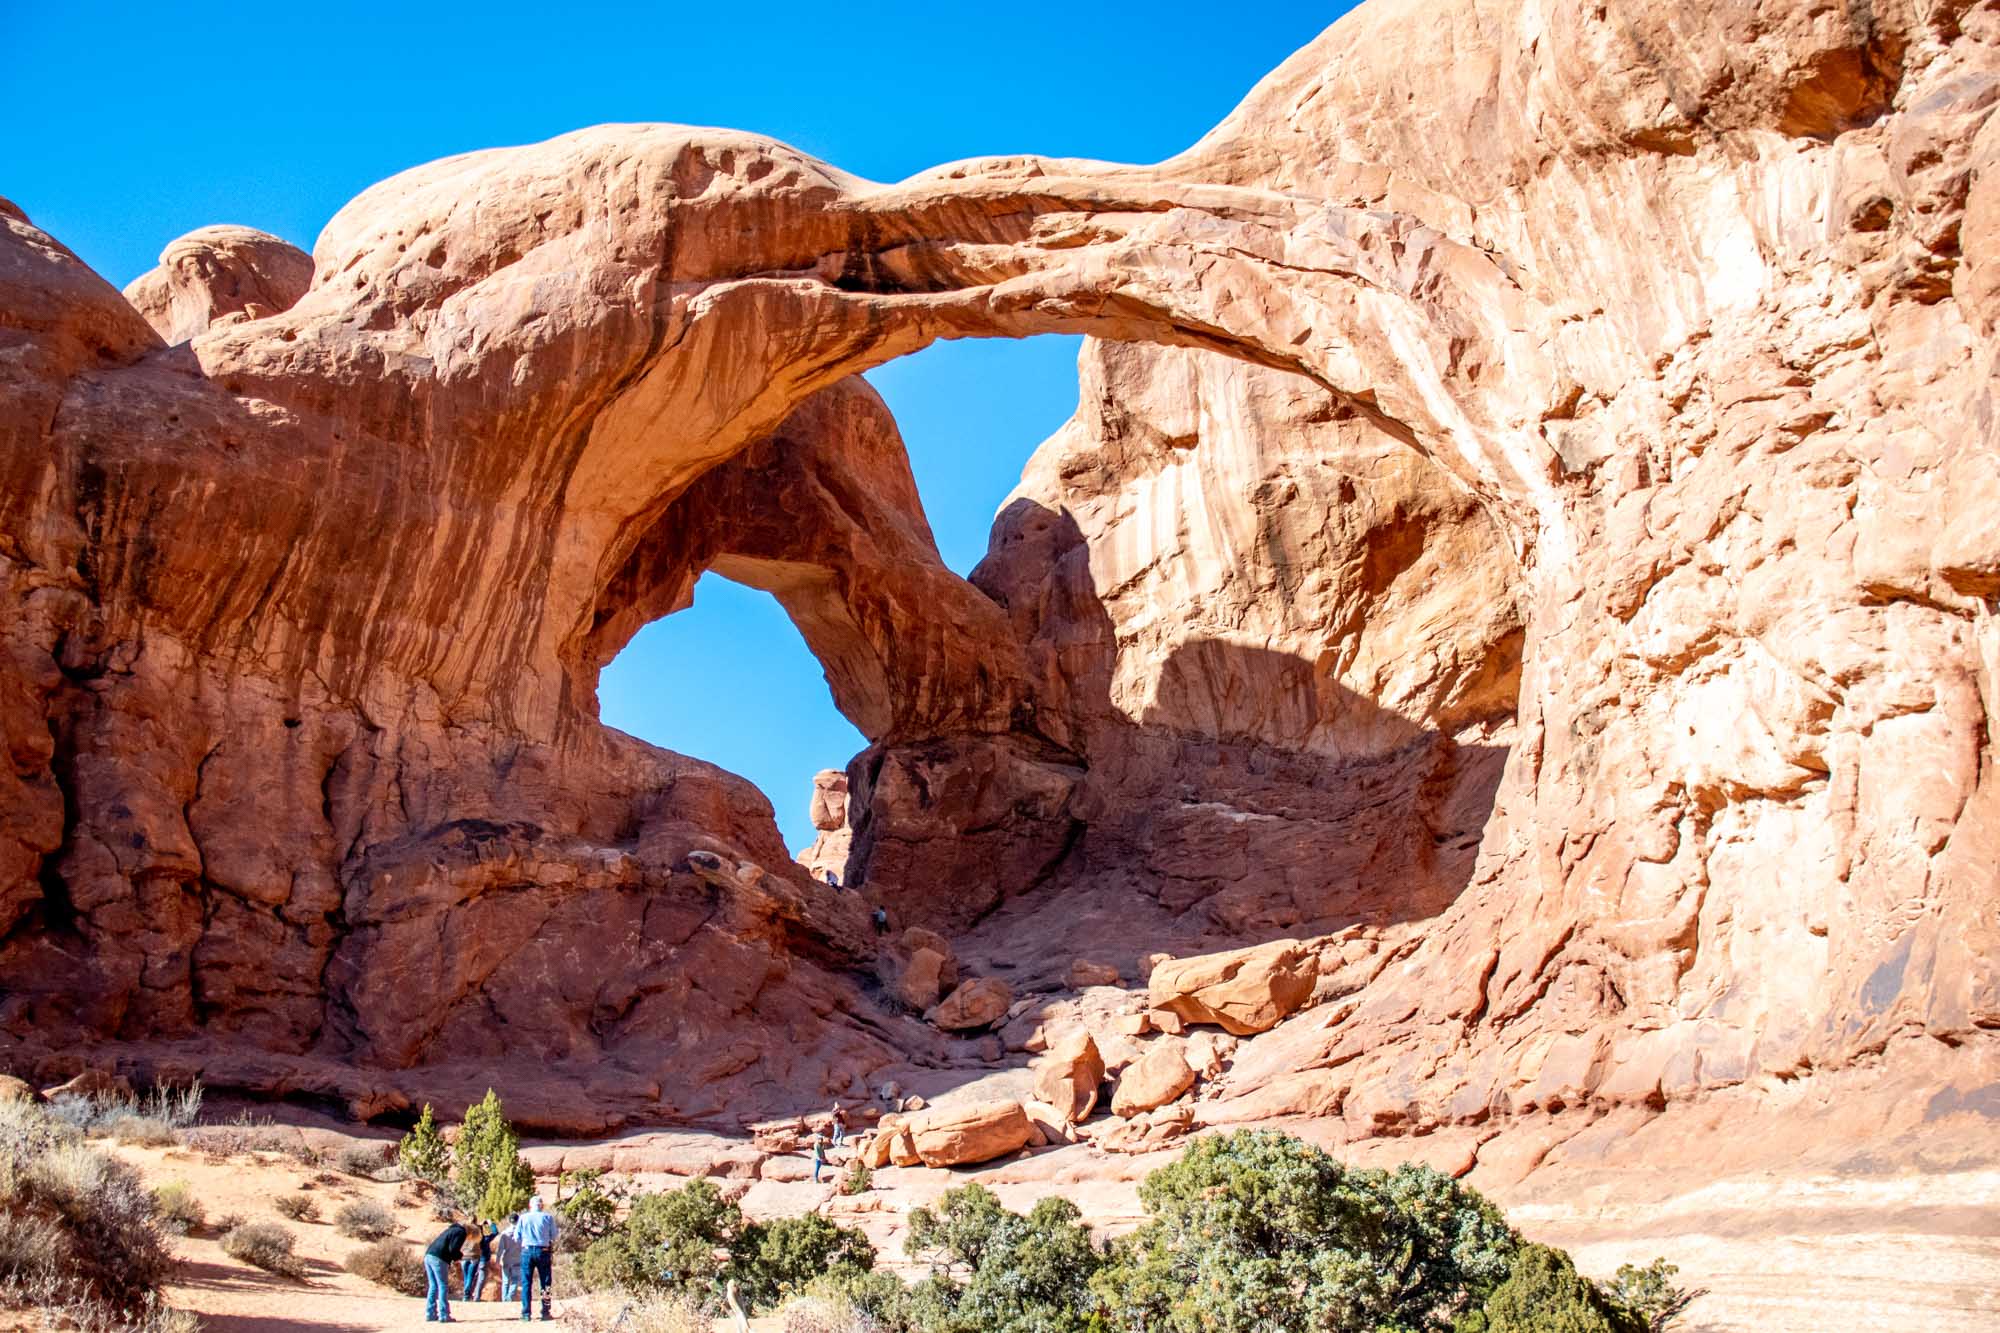 People at the Double Arch rock formation